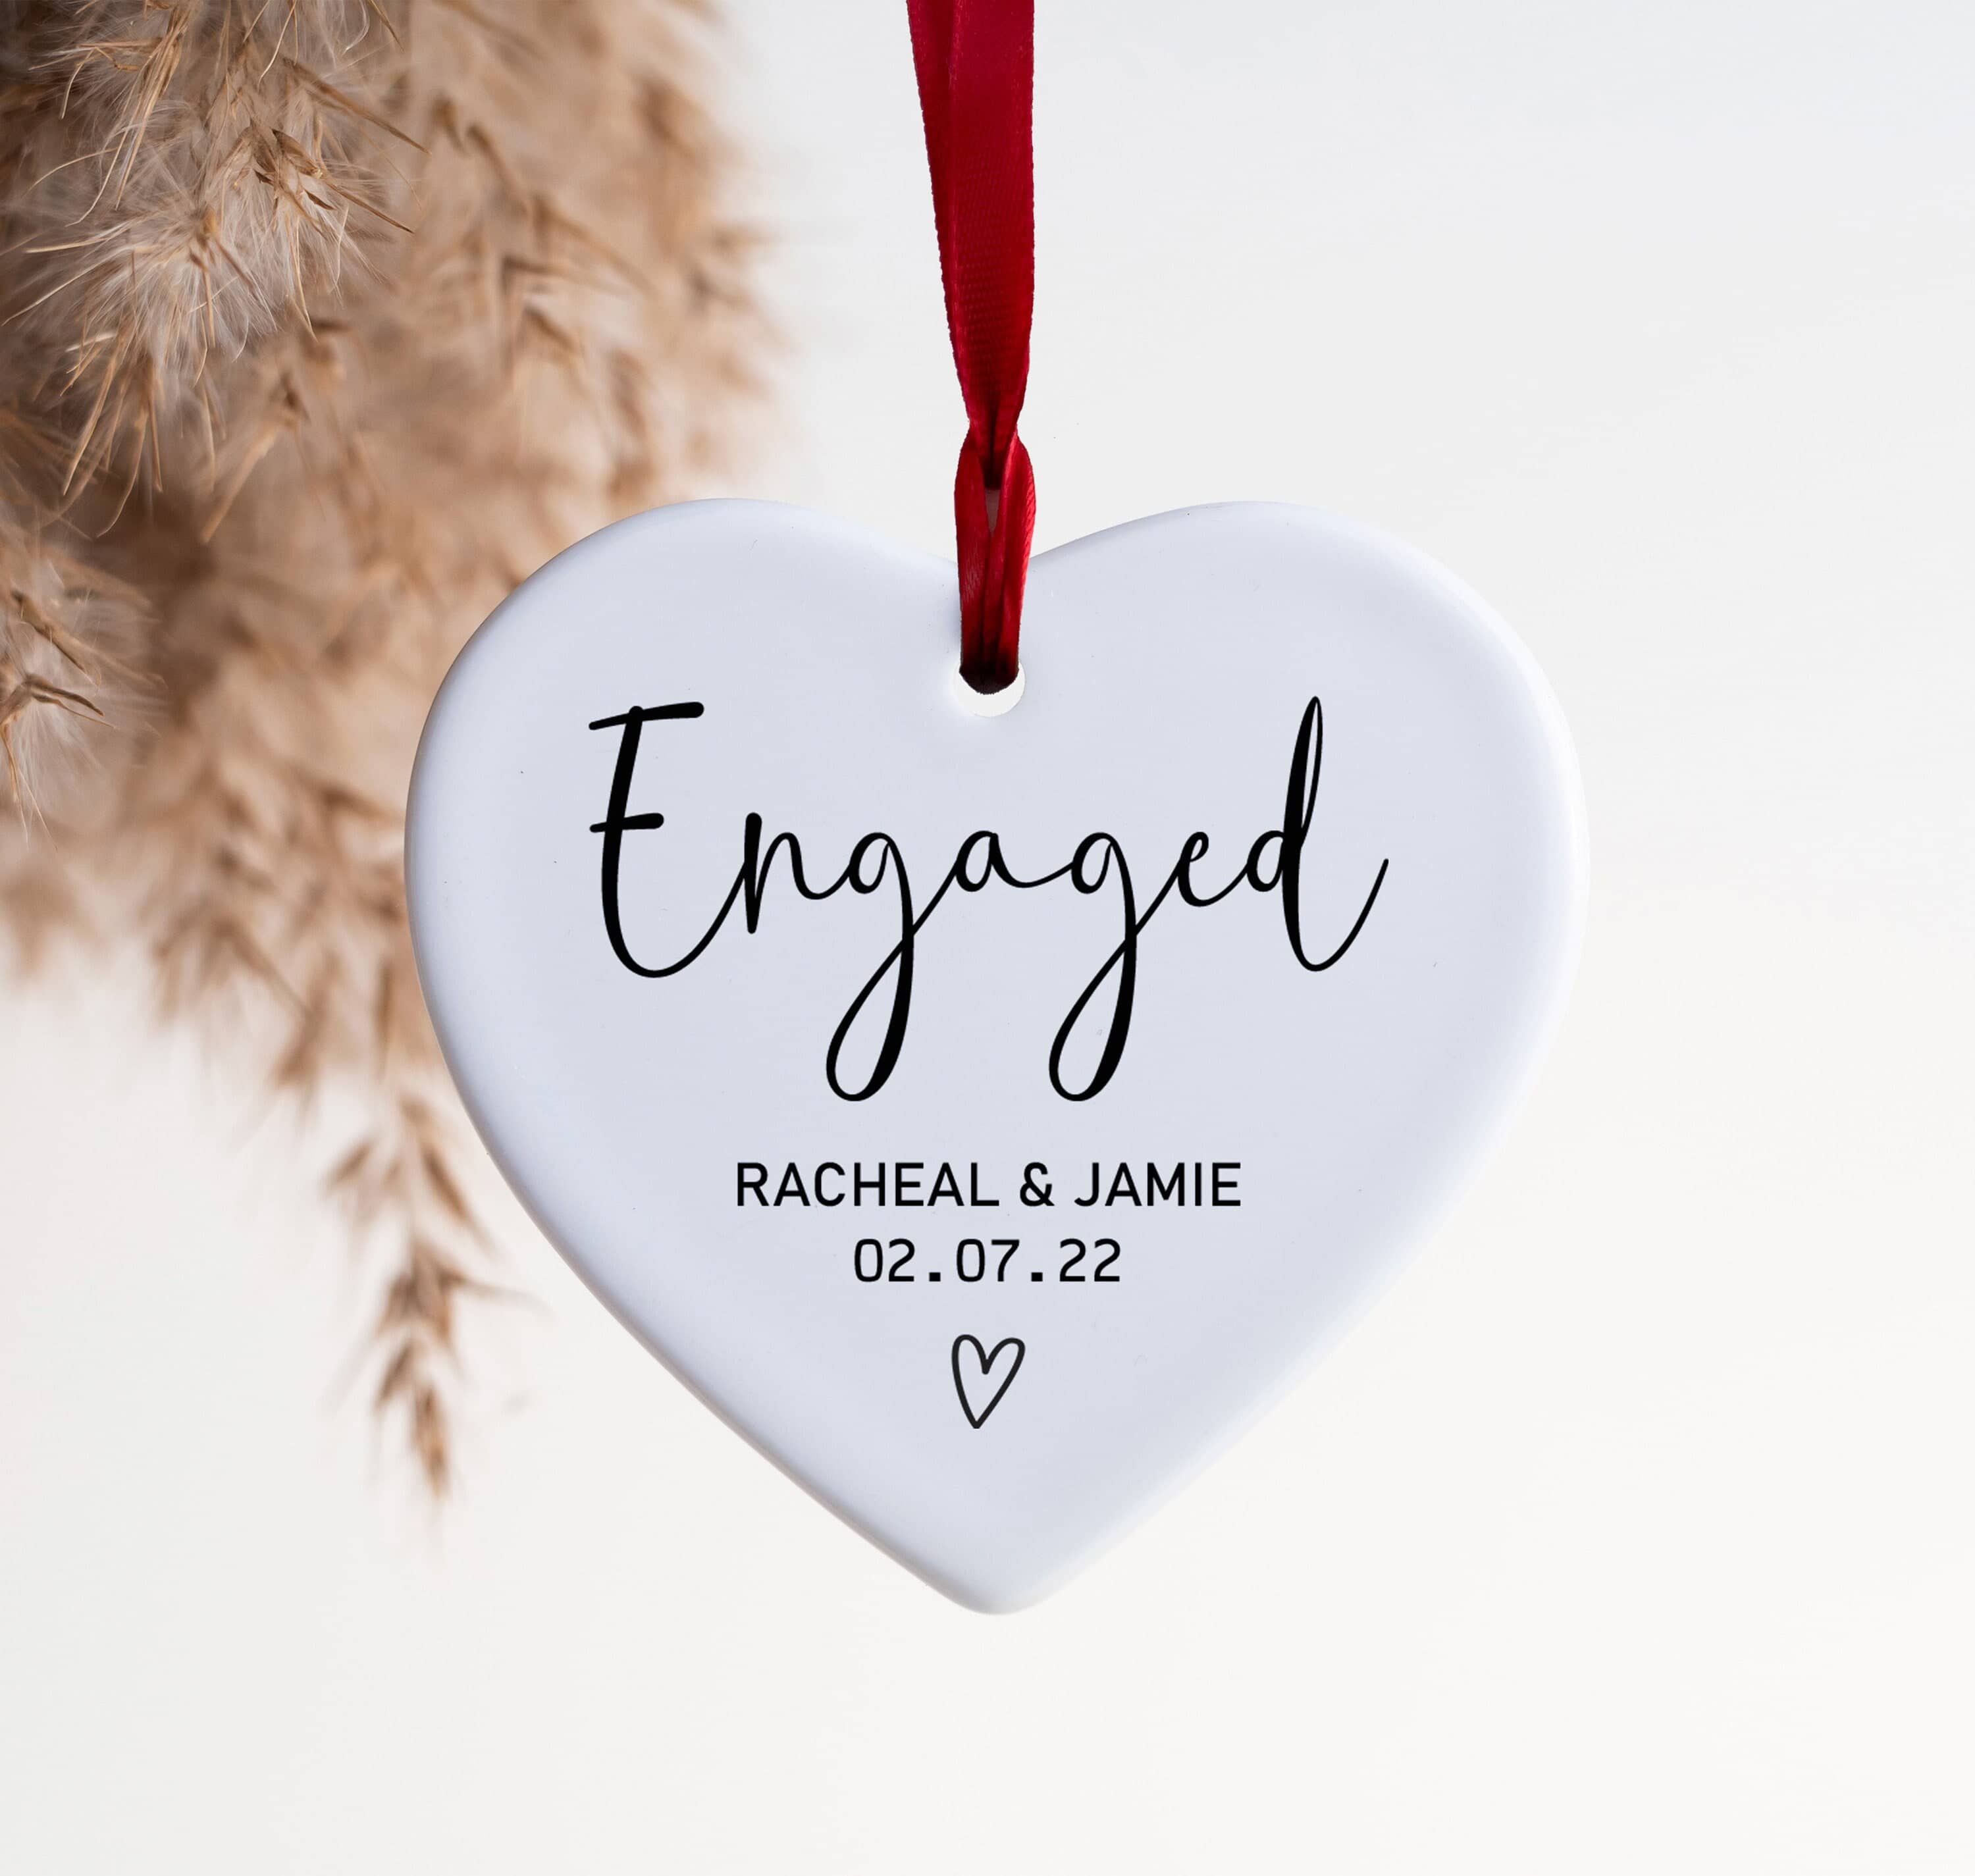 Personalised Engagement Gift Hanging Ceramic Heart with choice of Ribbon; Add Names and Date for Custom Unique Present Idea for Couple